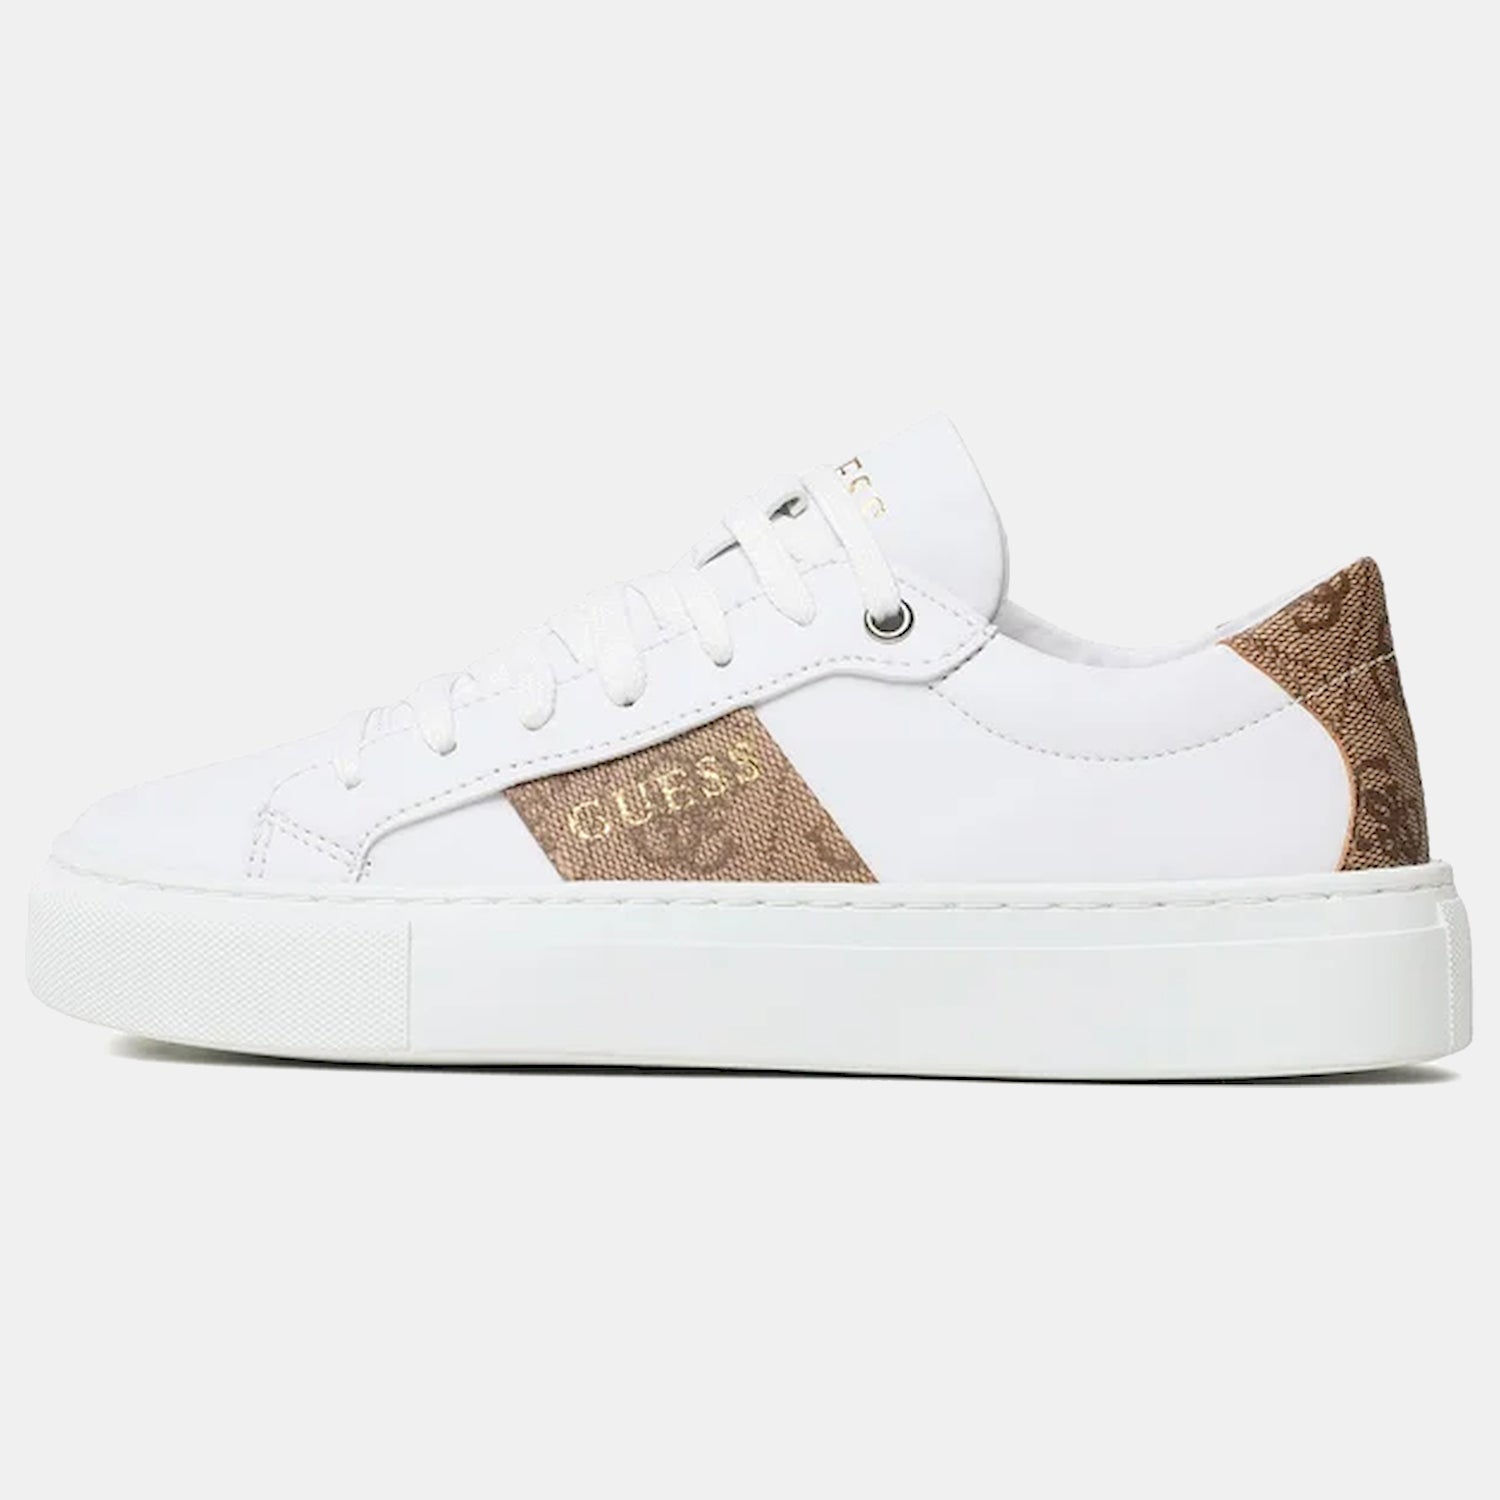 Guess Sapatilhas Sneakers Shoes Fl6tod Whi Brown Branco Castanho_shot4